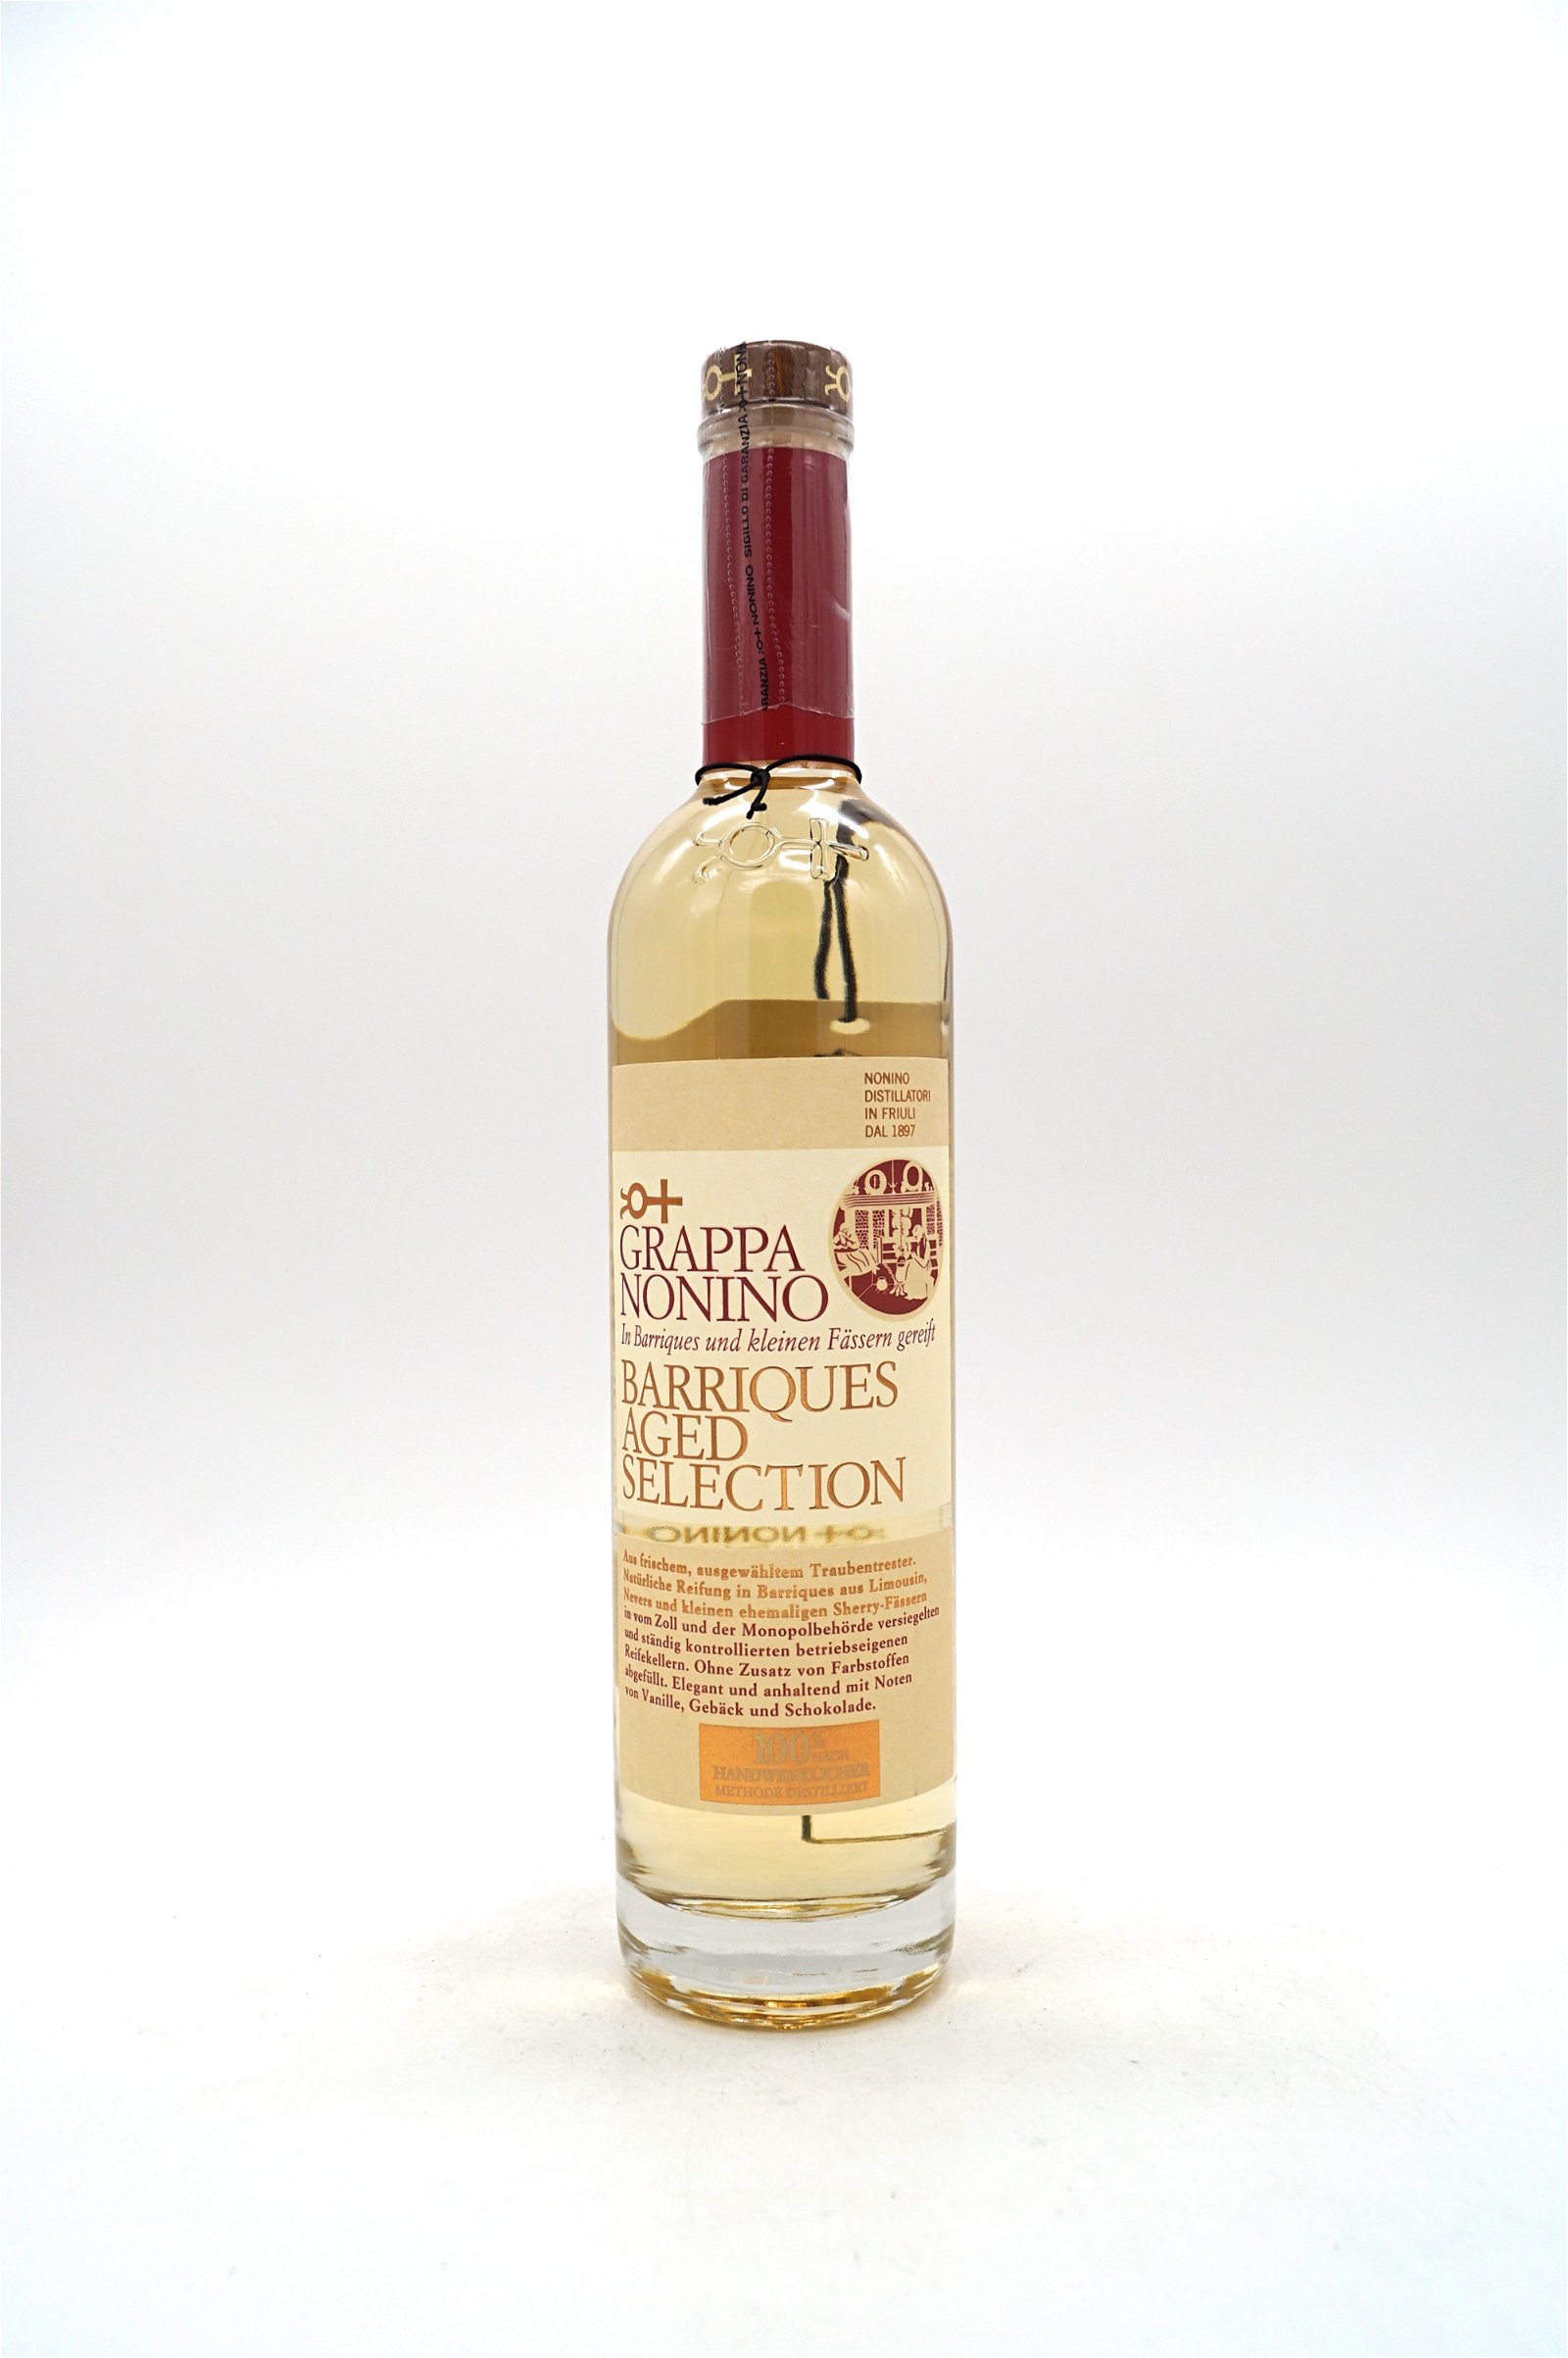 Nonino Barriques Aged Selection Grappa